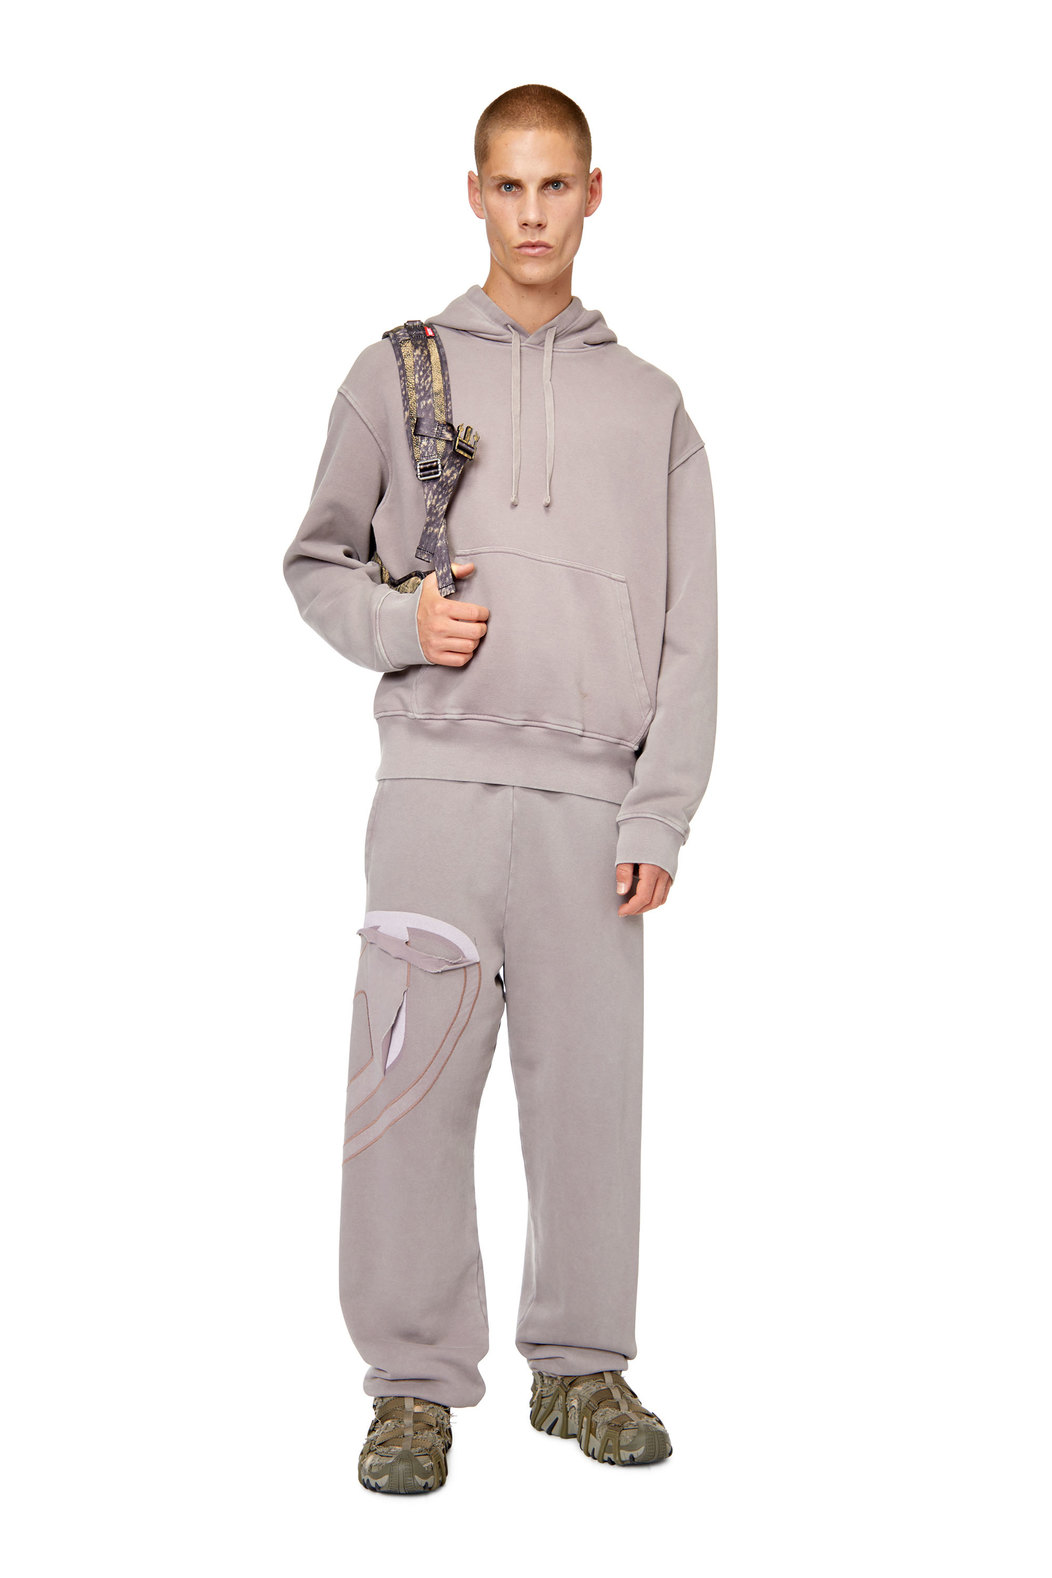 Track pants with peel-off maxi oval logo